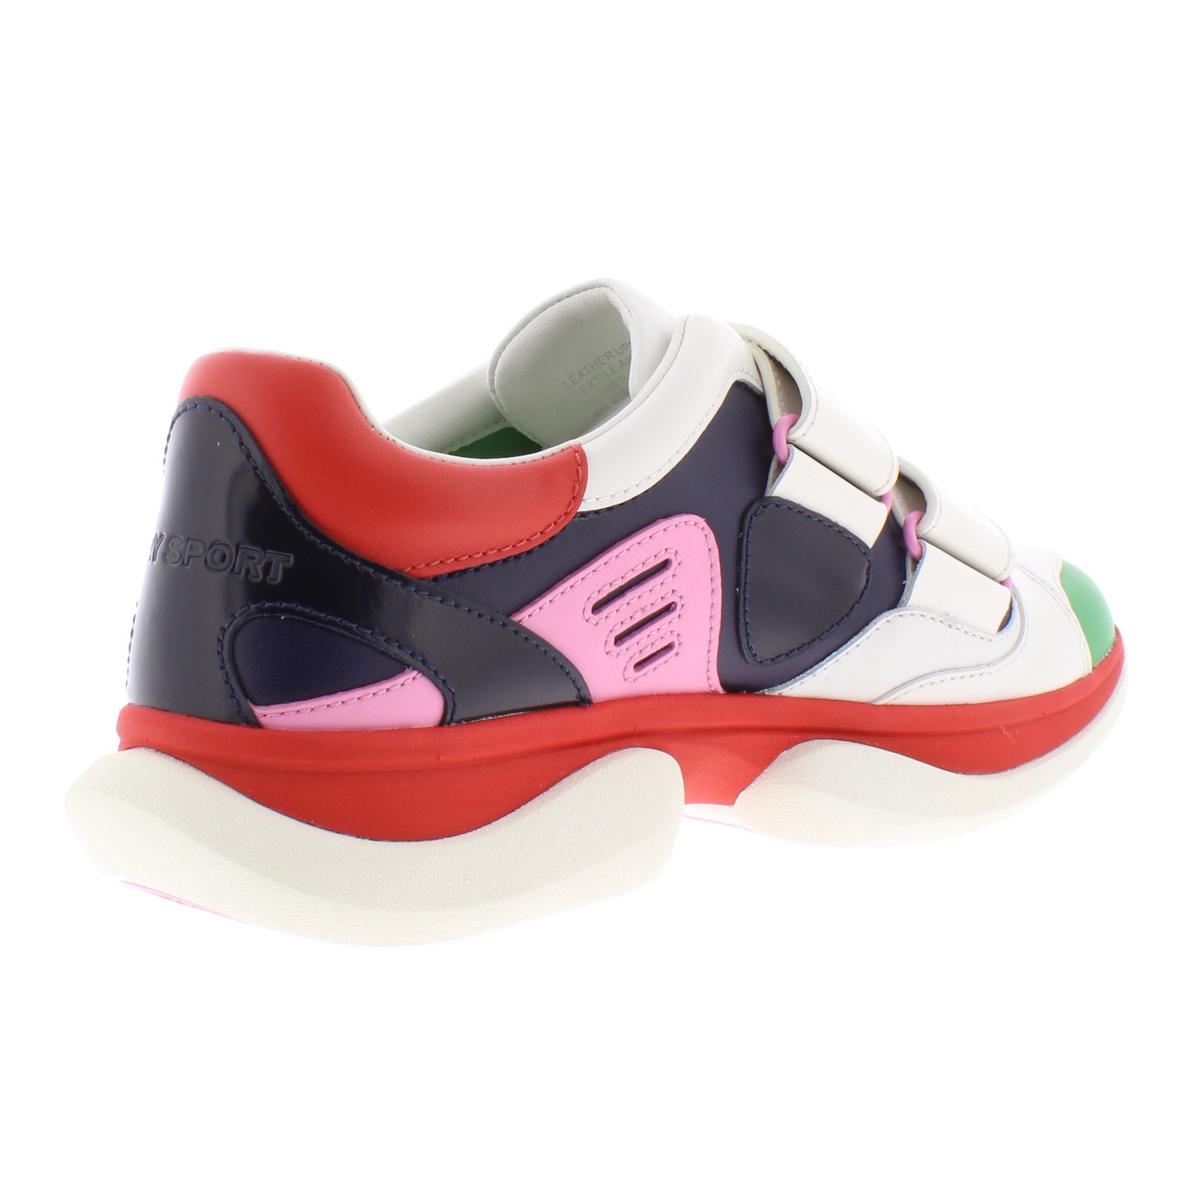 Tory Sport Womens Bubble Leather Low Top Fashion Sneakers Shoes BHFO ...